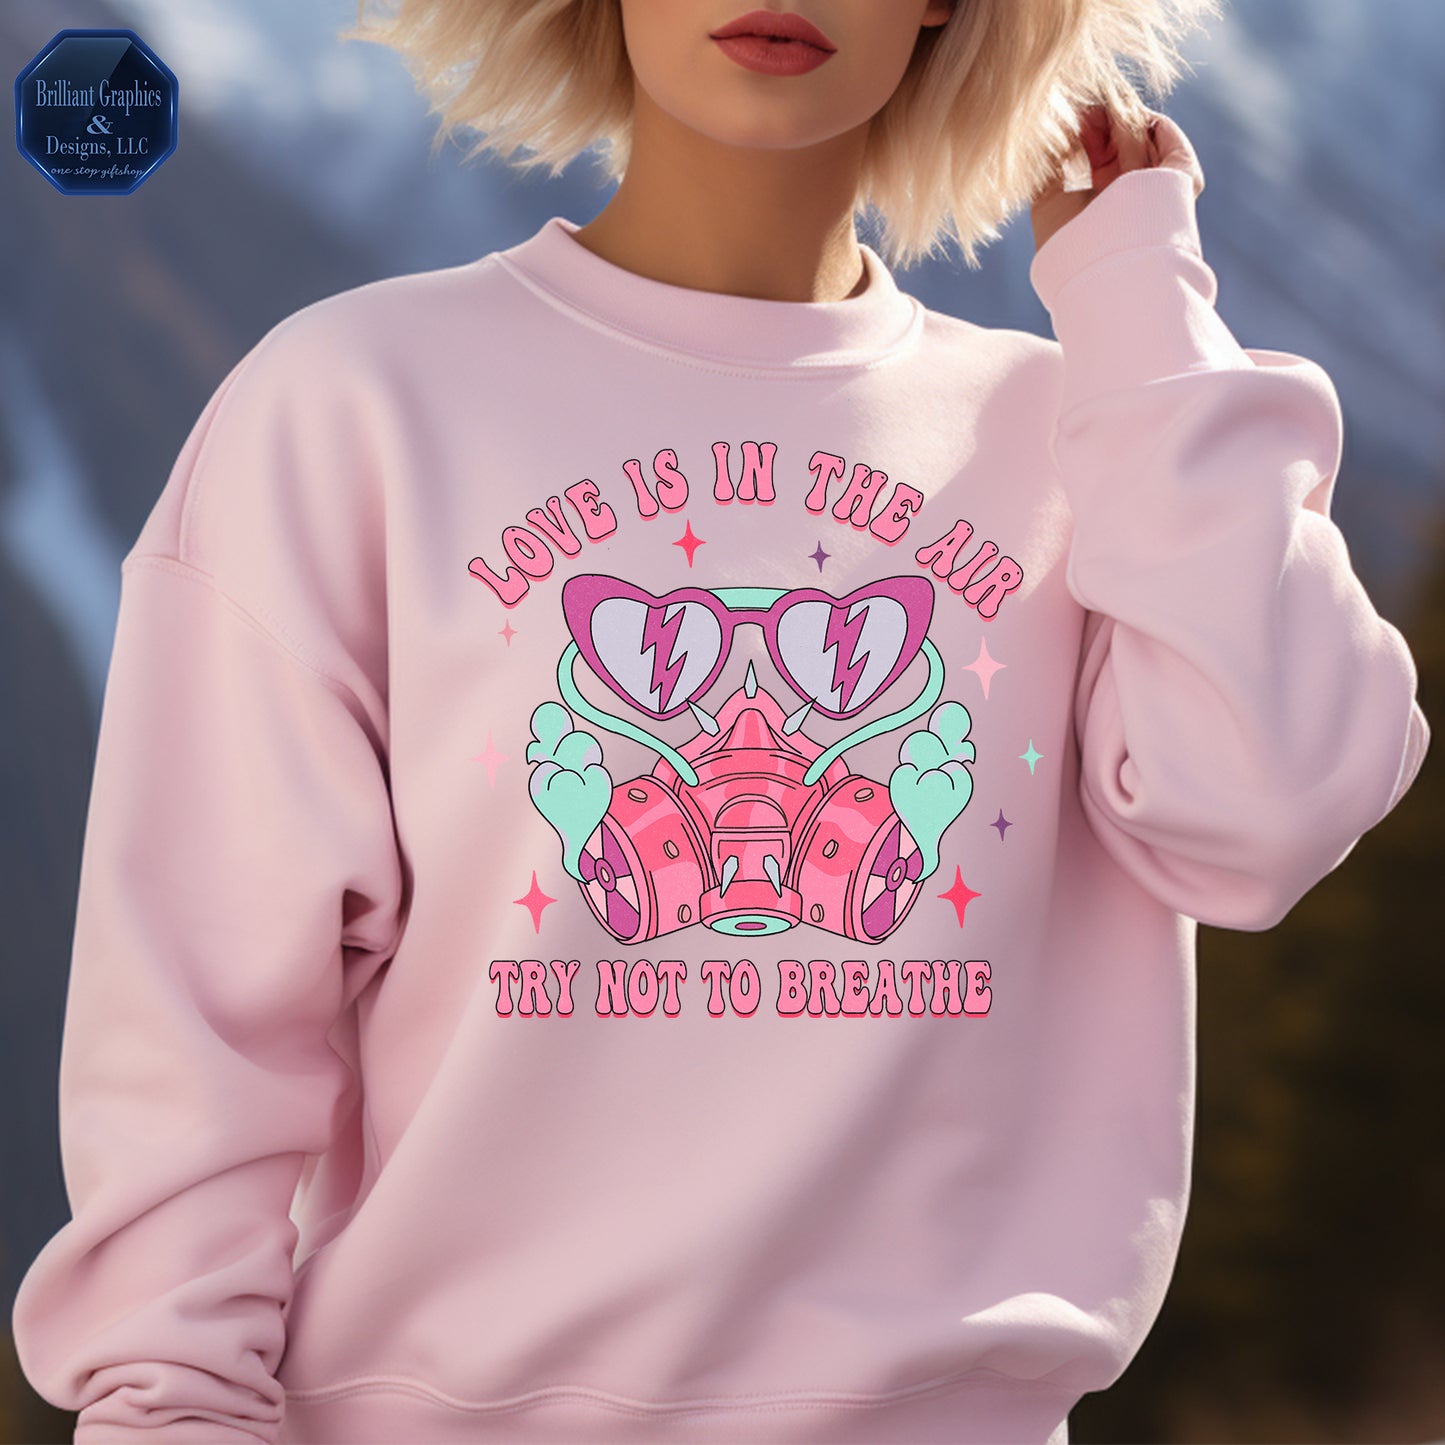 Love is in the Air, Try not to Breathe Sweatshirt